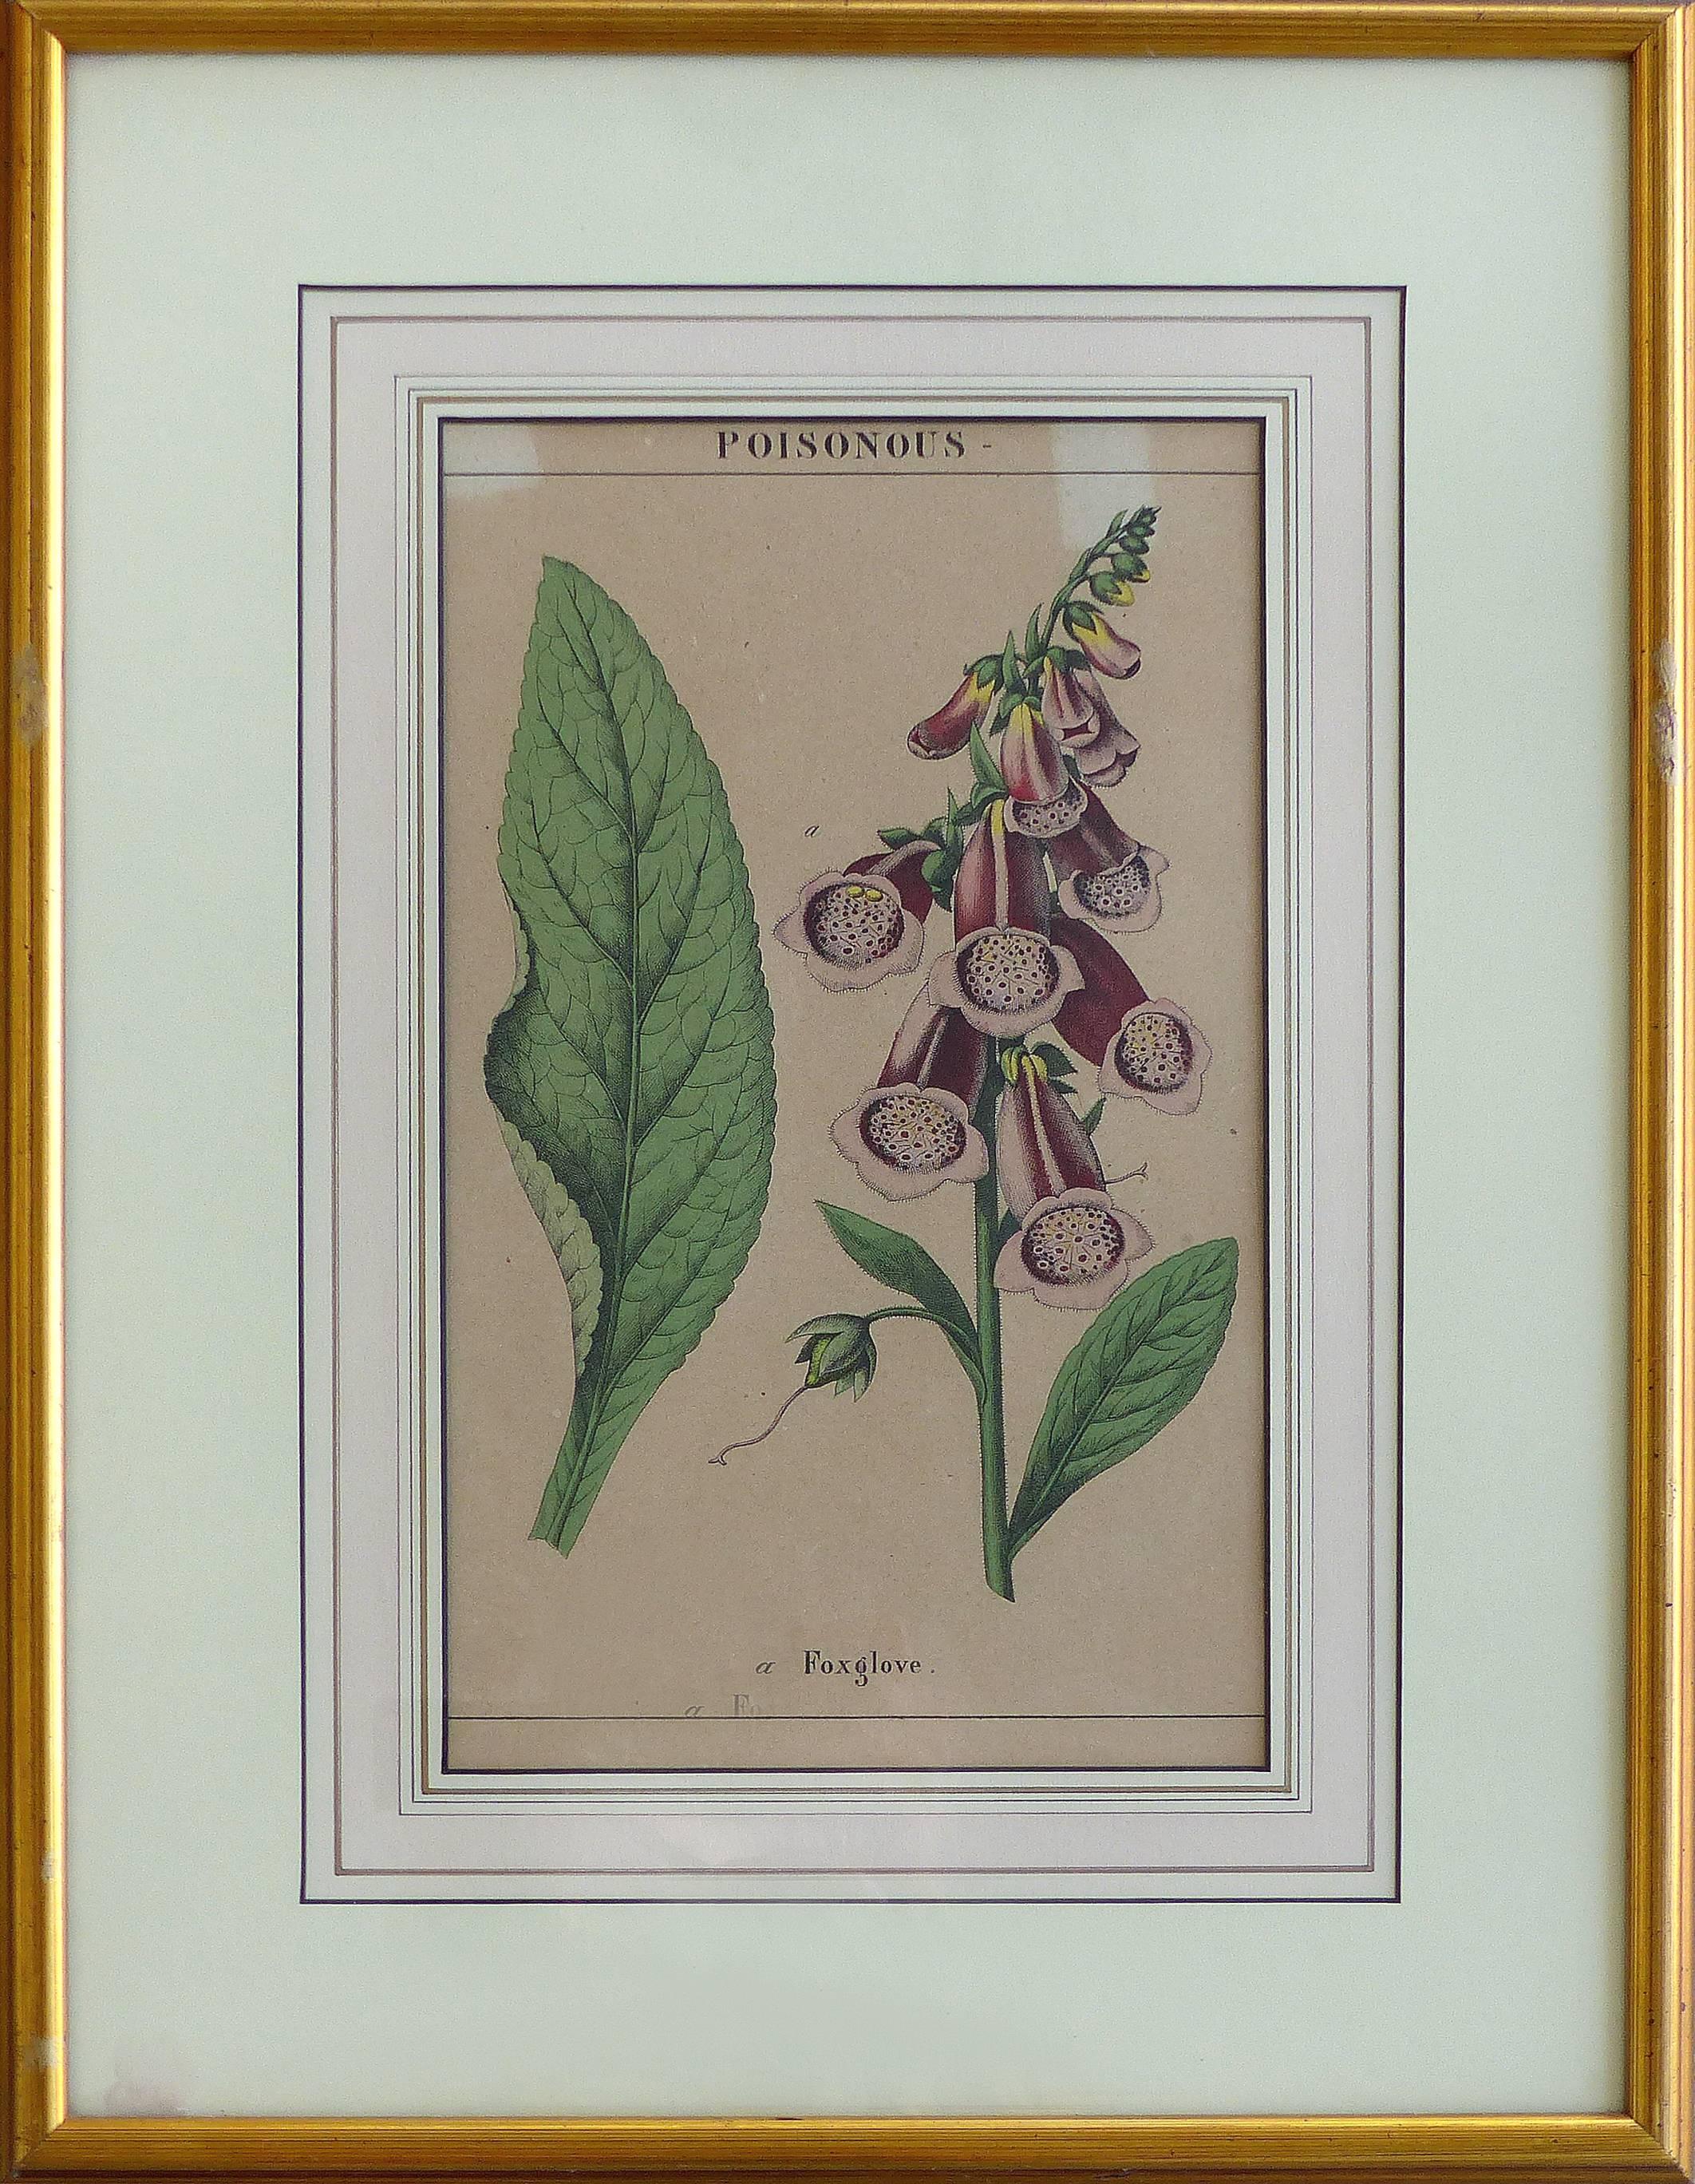 Offered is a set of three framed 19th century English botanical engravings of poisonous flowers. Nicely presented in giltwood frames with handmade French mats under glass. Wired and ready for hanging. The antique engravings show minor wear